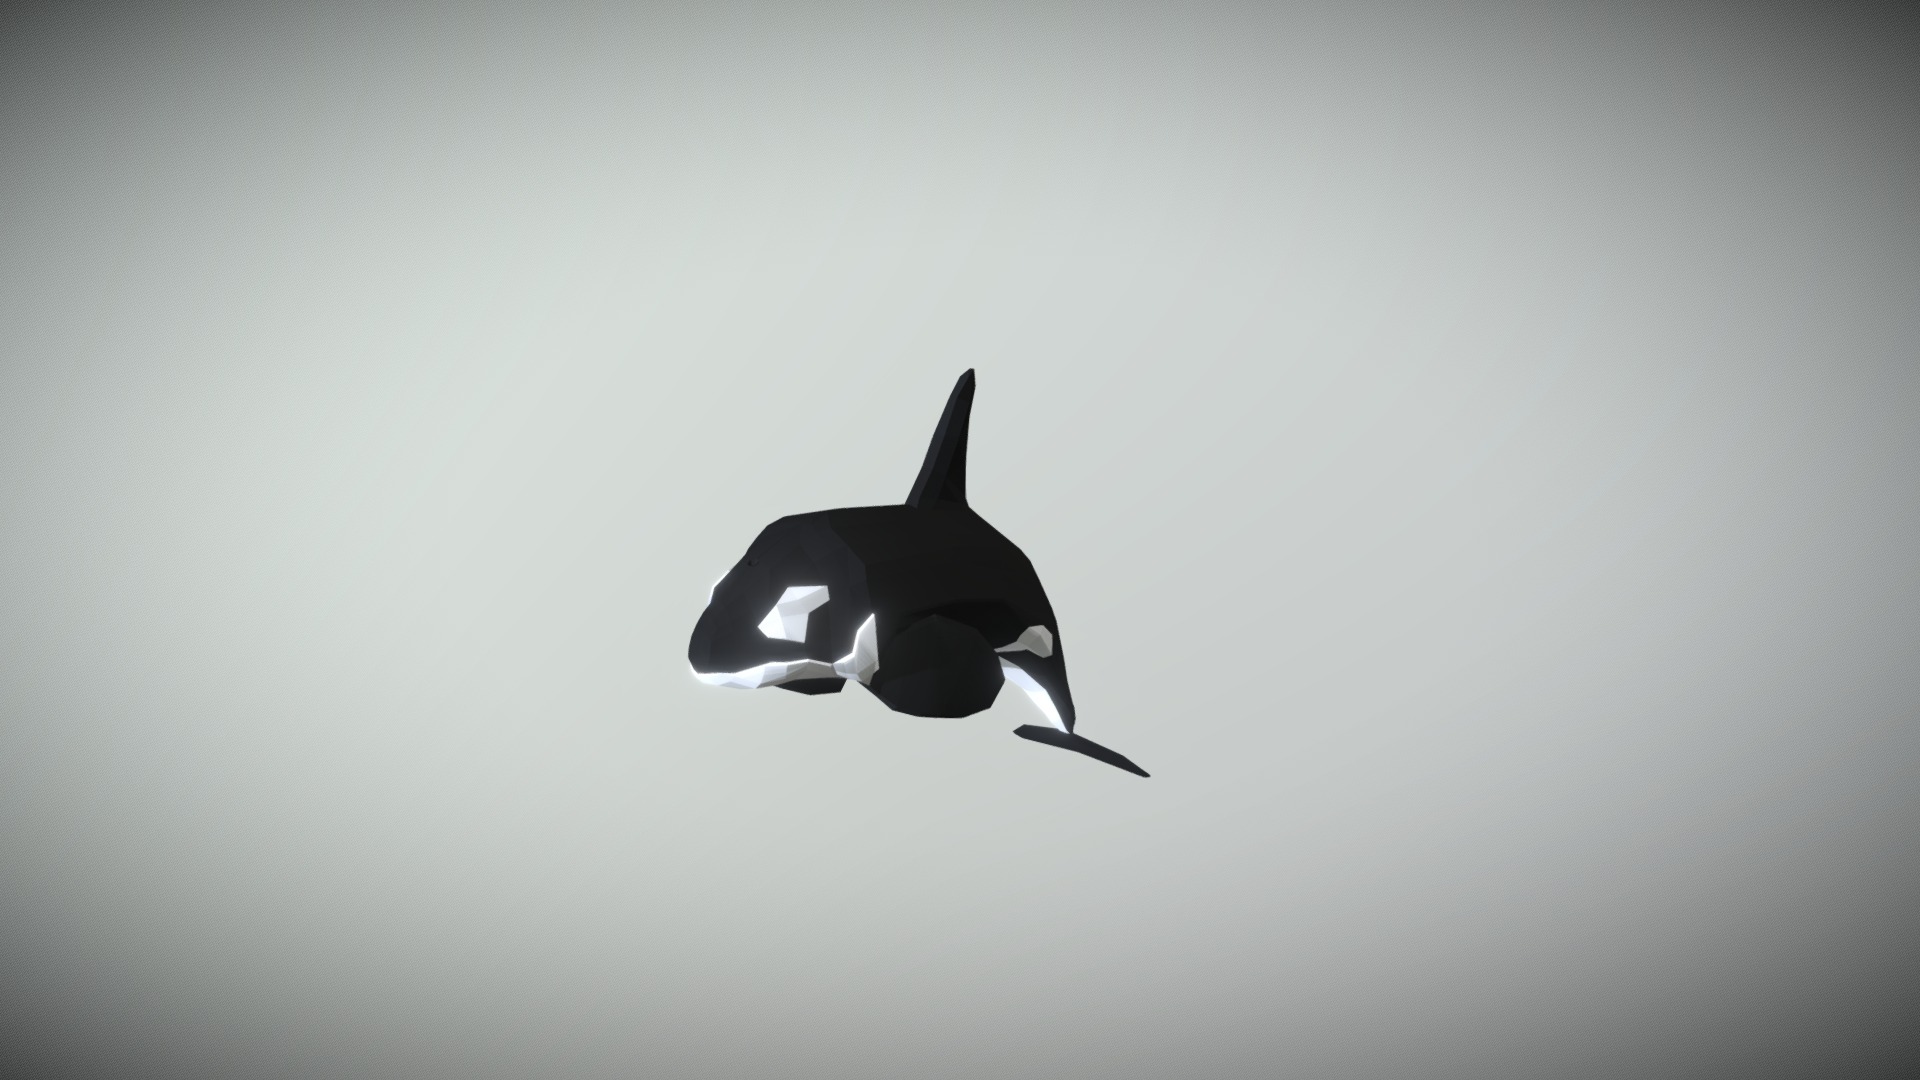 3D model LowPoly Orca - This is a 3D model of the LowPoly Orca. The 3D model is about a shark swimming in the water.